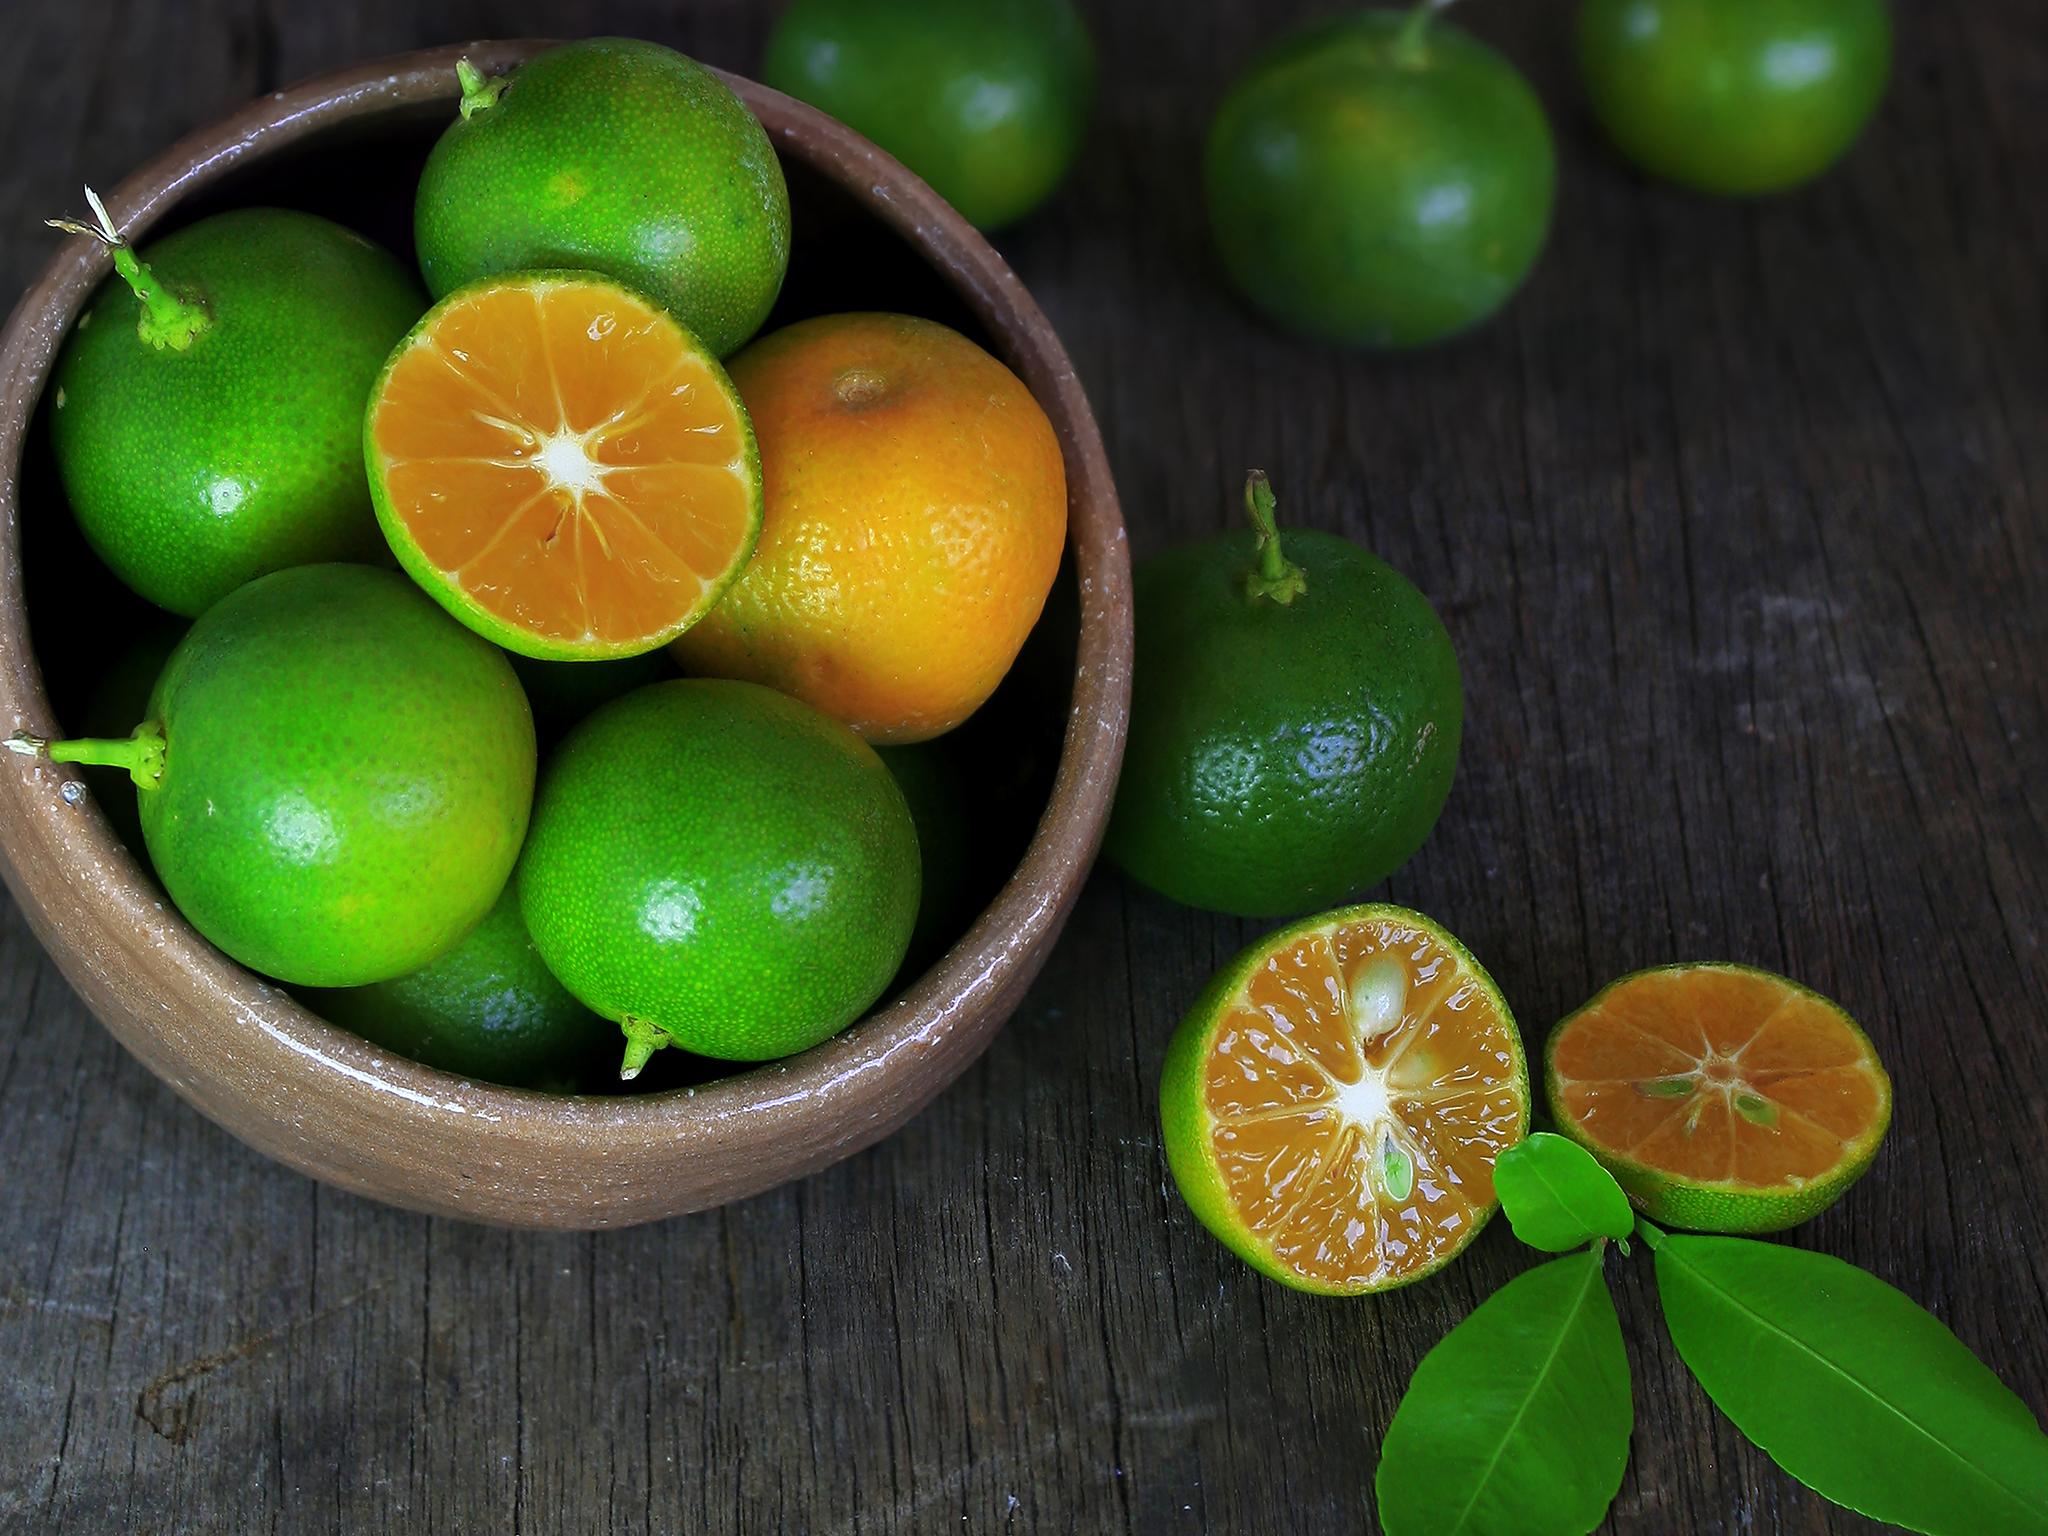 These limes have a stronger scent than the ones you typically find at the grocery store